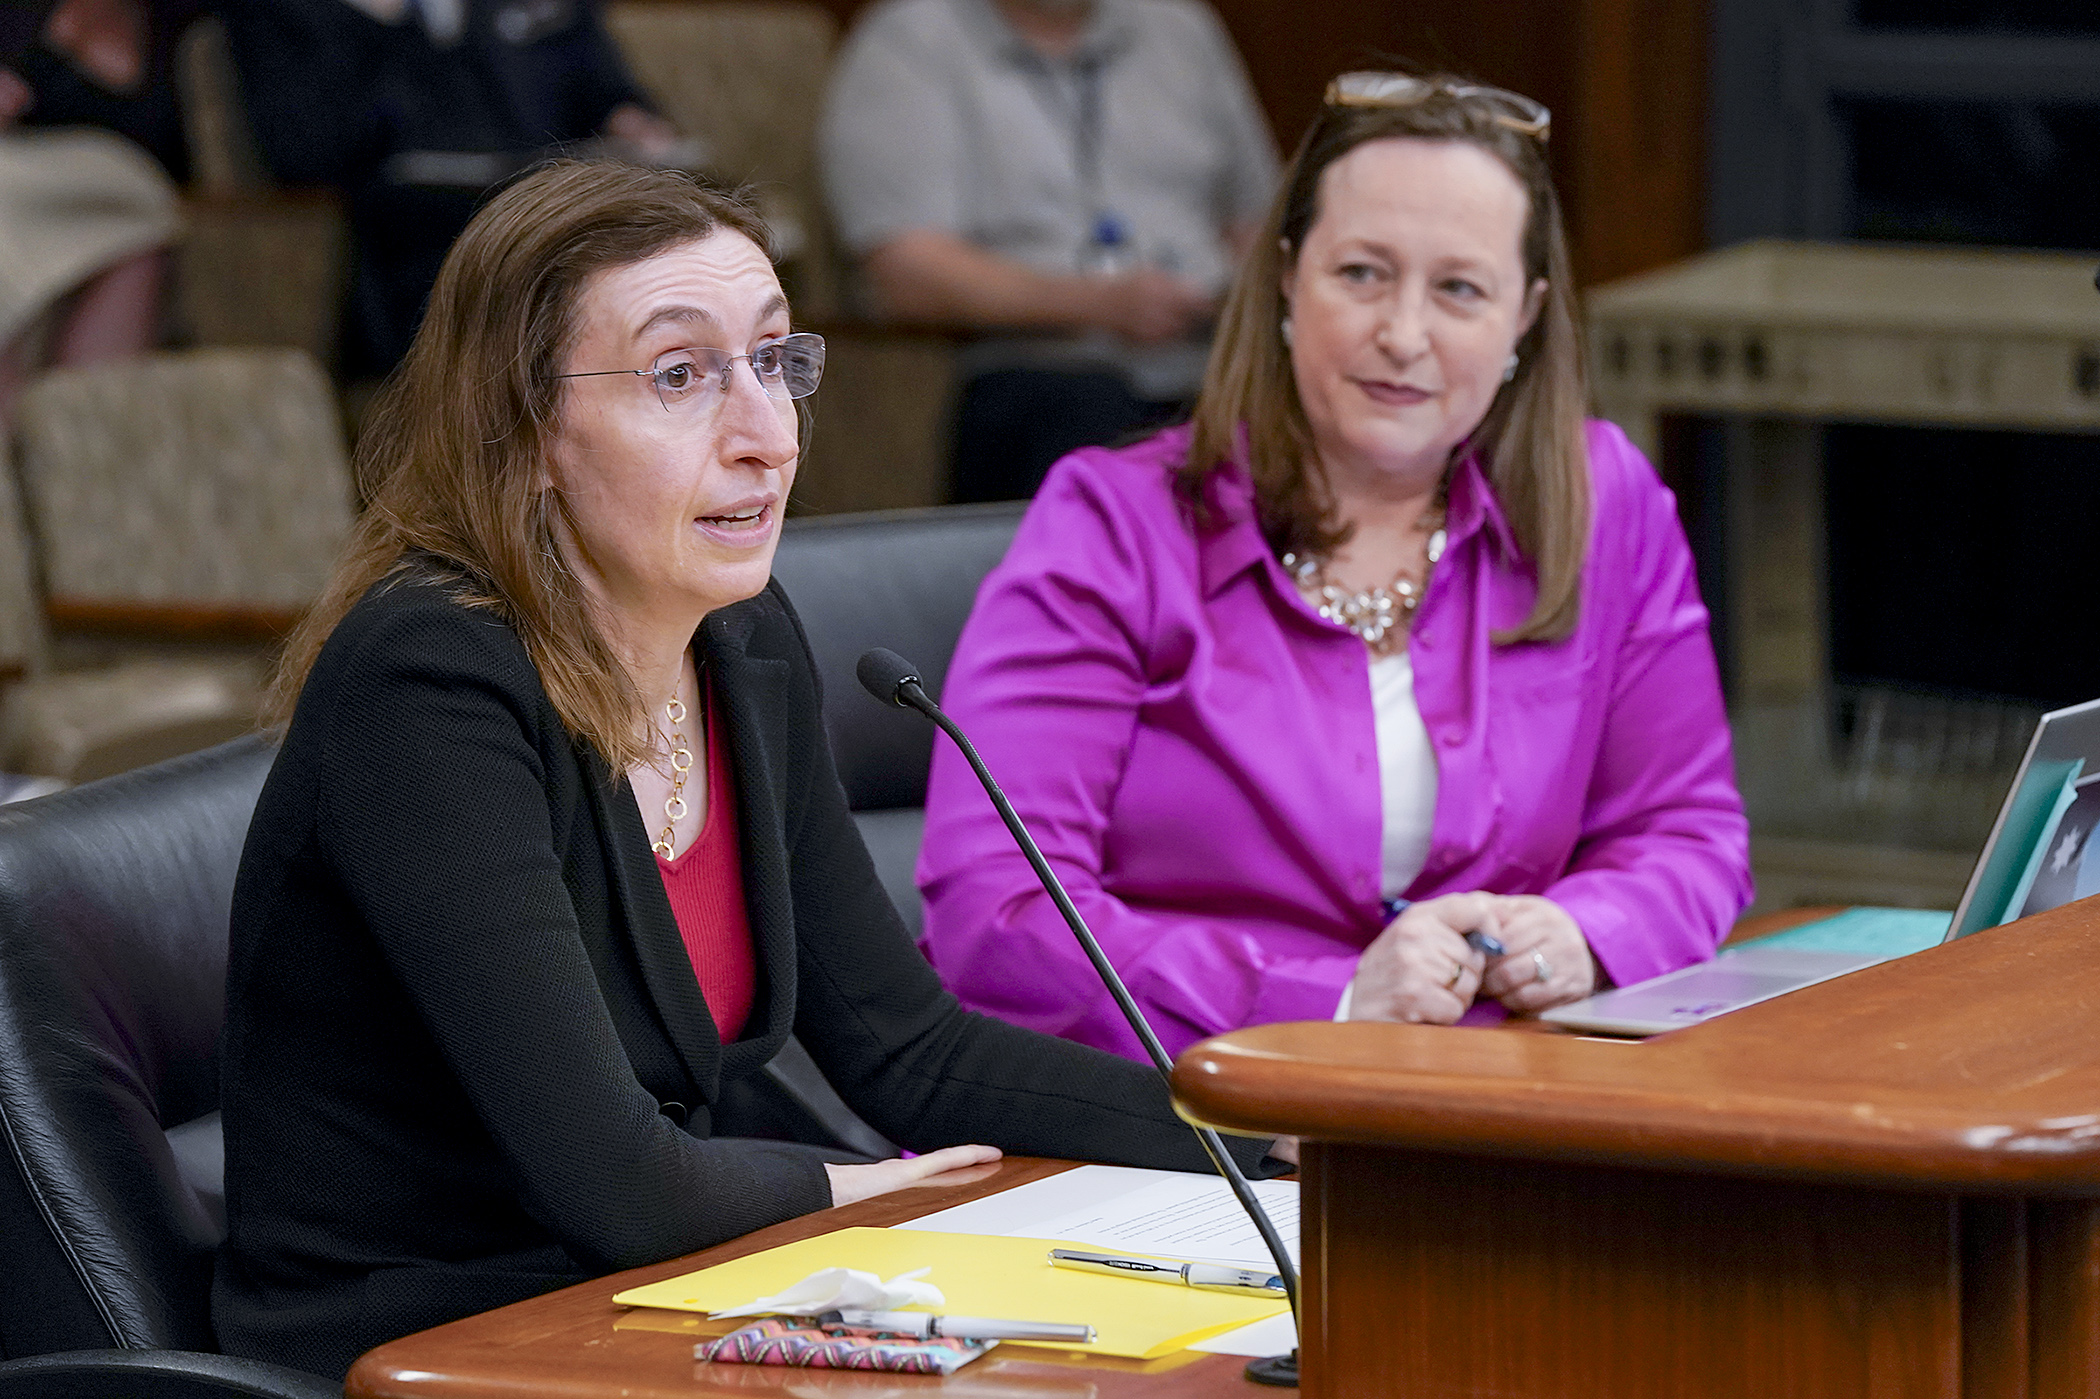 University of Minnesota Law Professor Jill Hasday testifies before the House labor and industry committee in support of HF3587. Sponsored by Rep. Kristin Bahner, it'd require employers to disclose salary ranges in job postings. (Photo by Michele Jokinen)